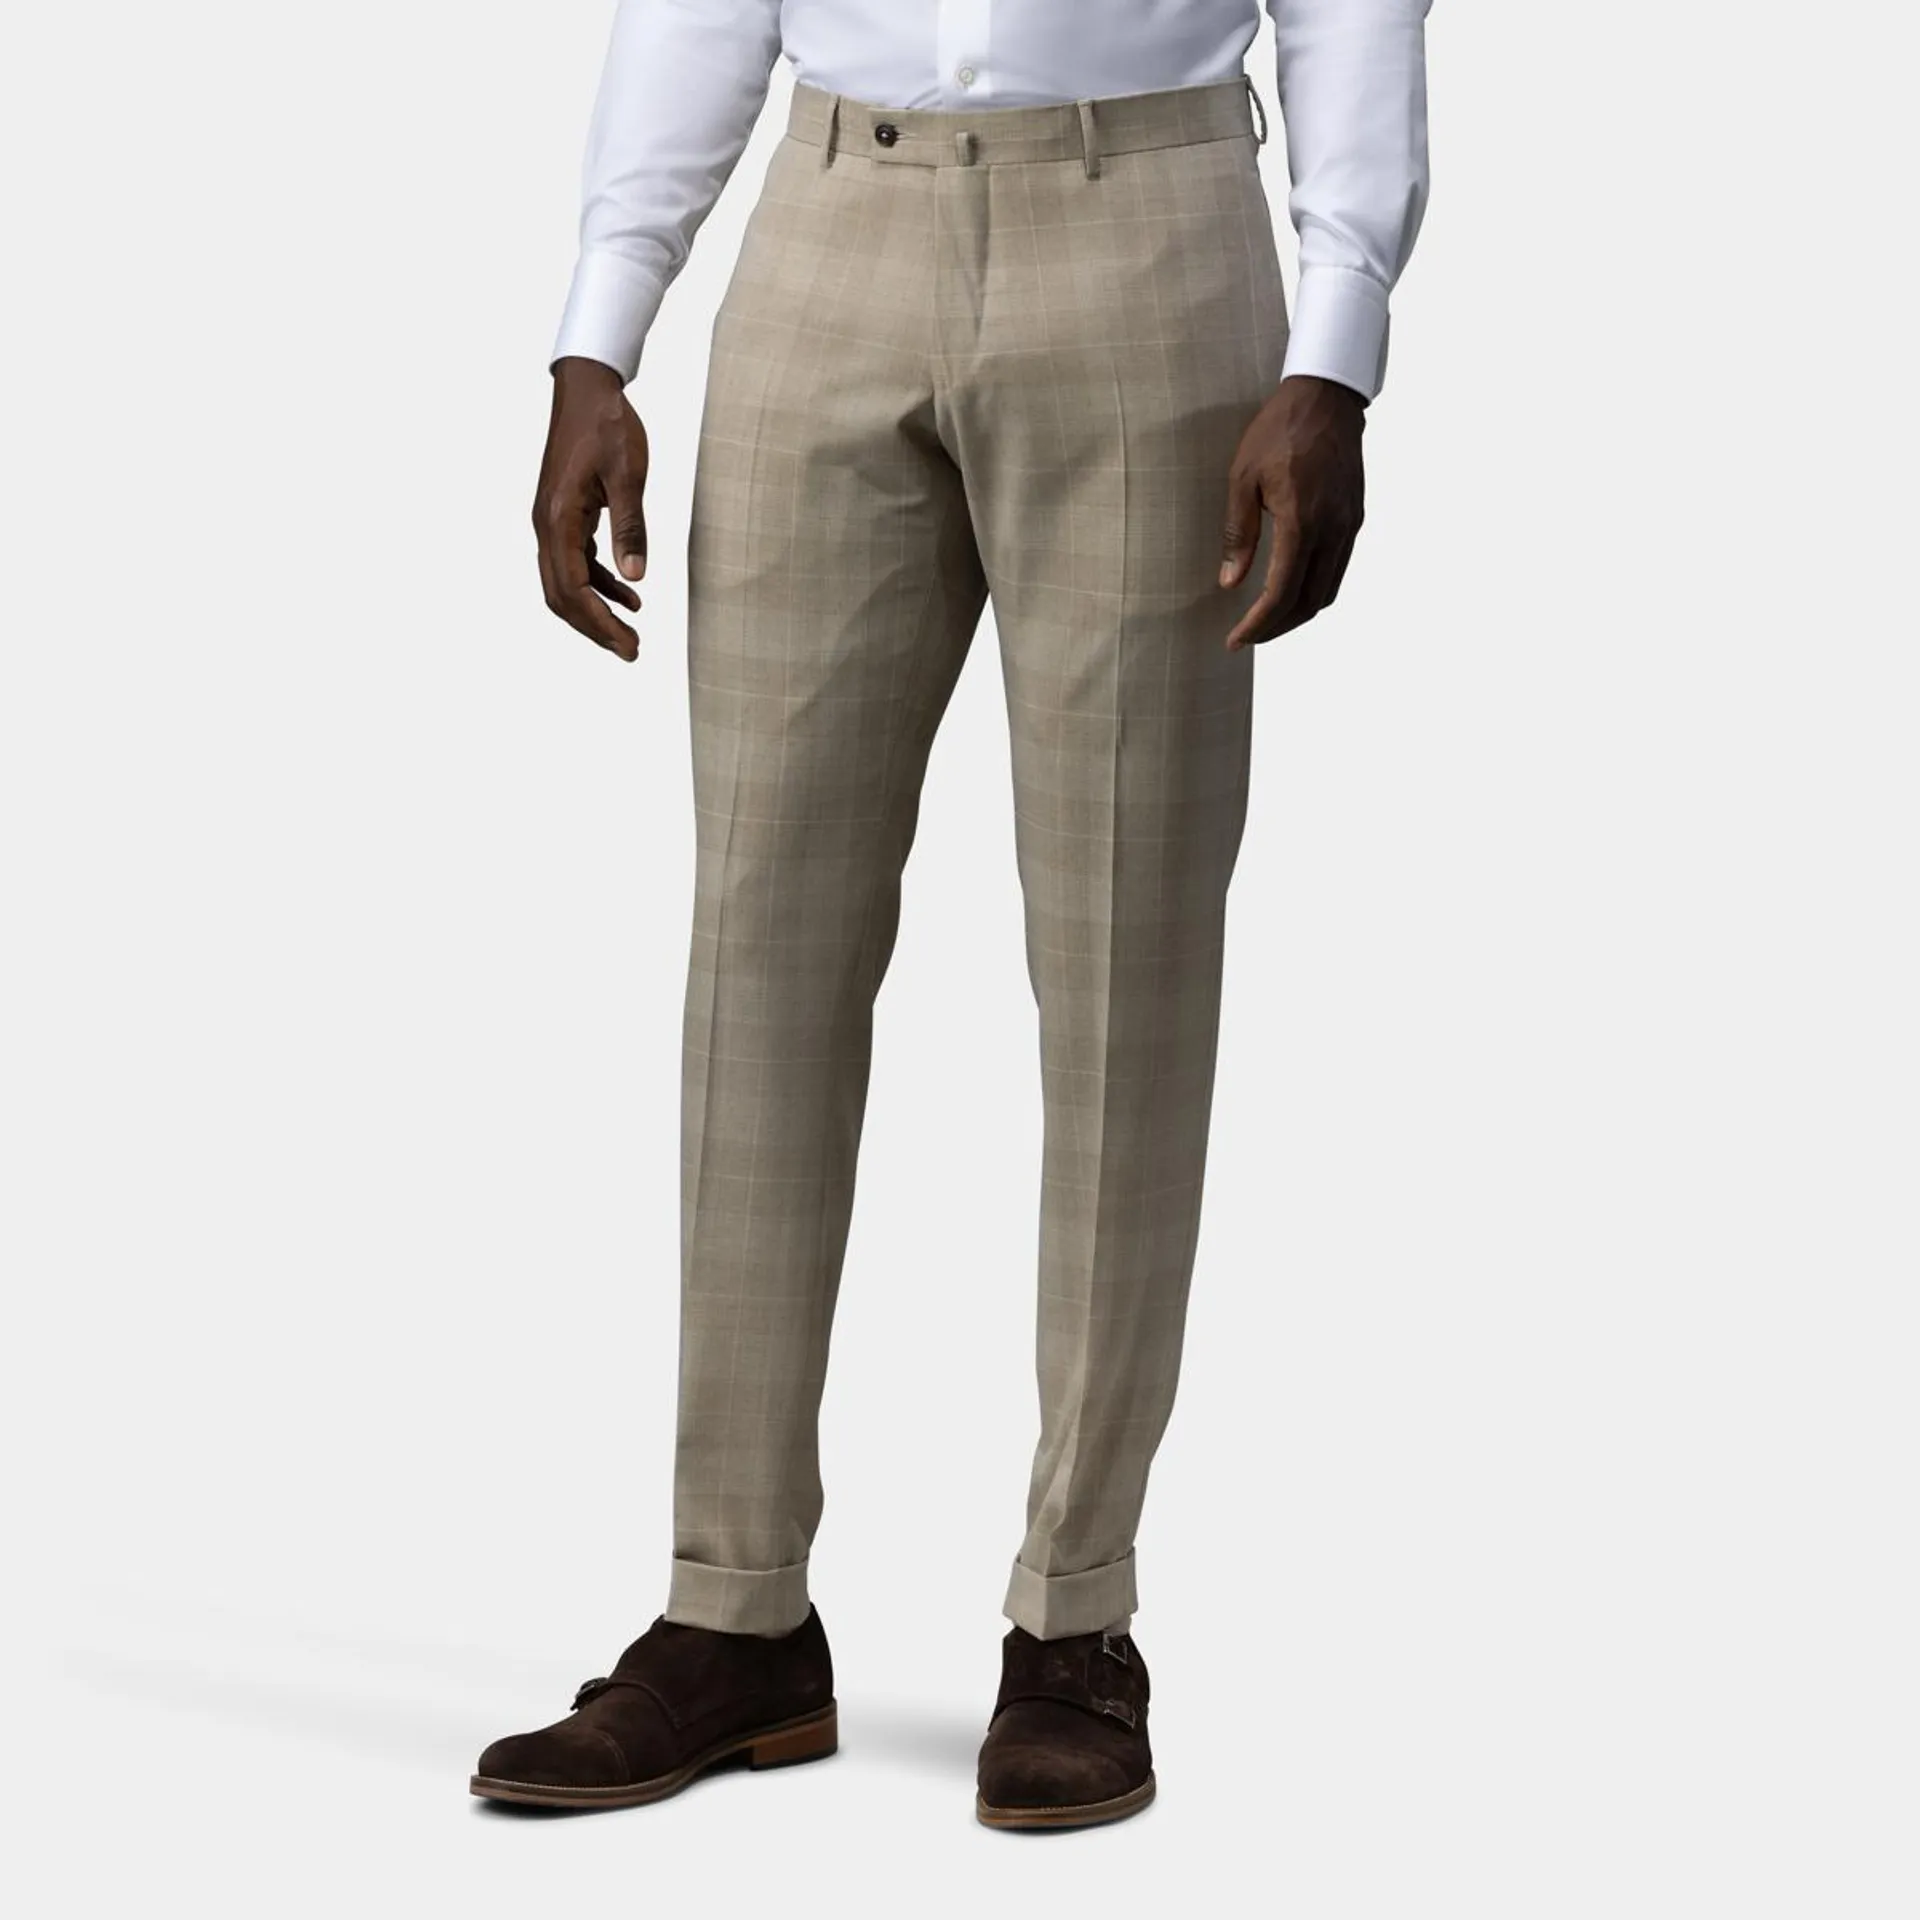 Beige checkered suit pants